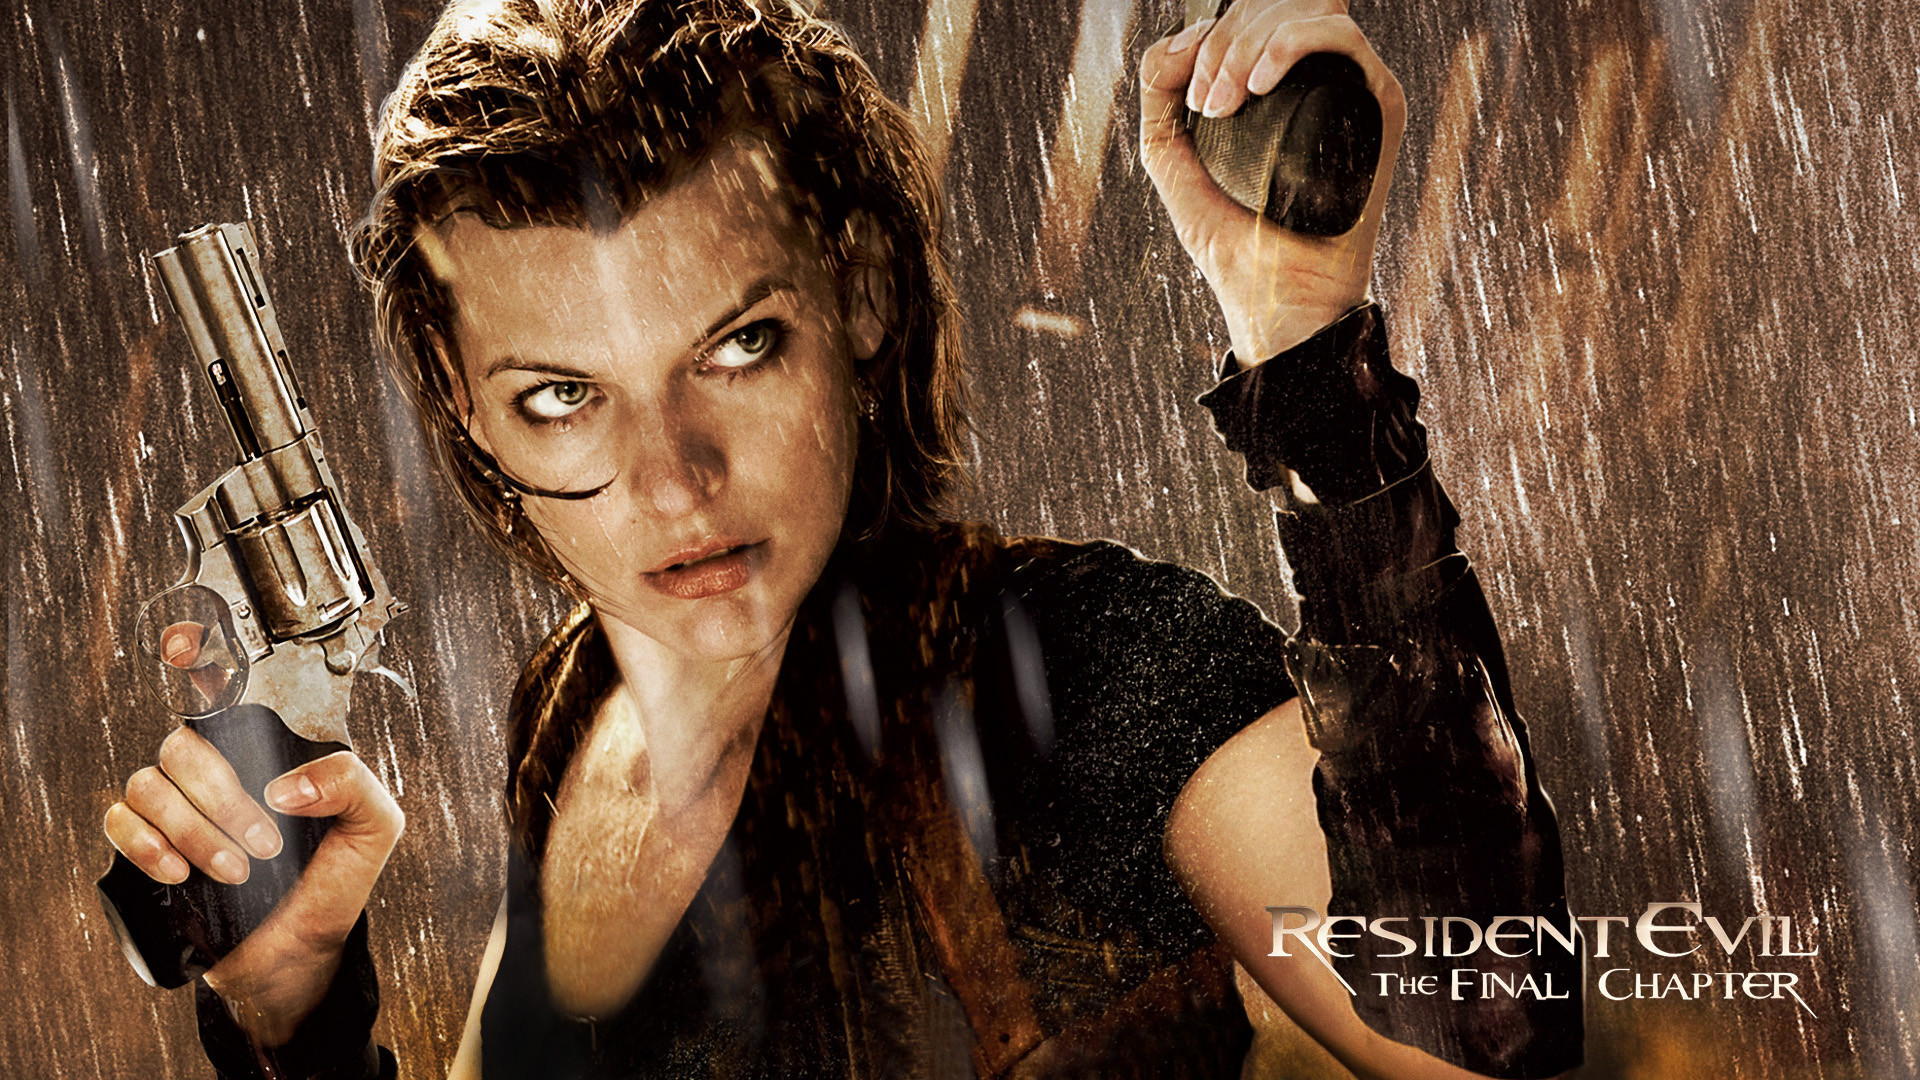 1920x1080 Image result for RESIDENT EVIL: THE FINAL CHAPTER hd images